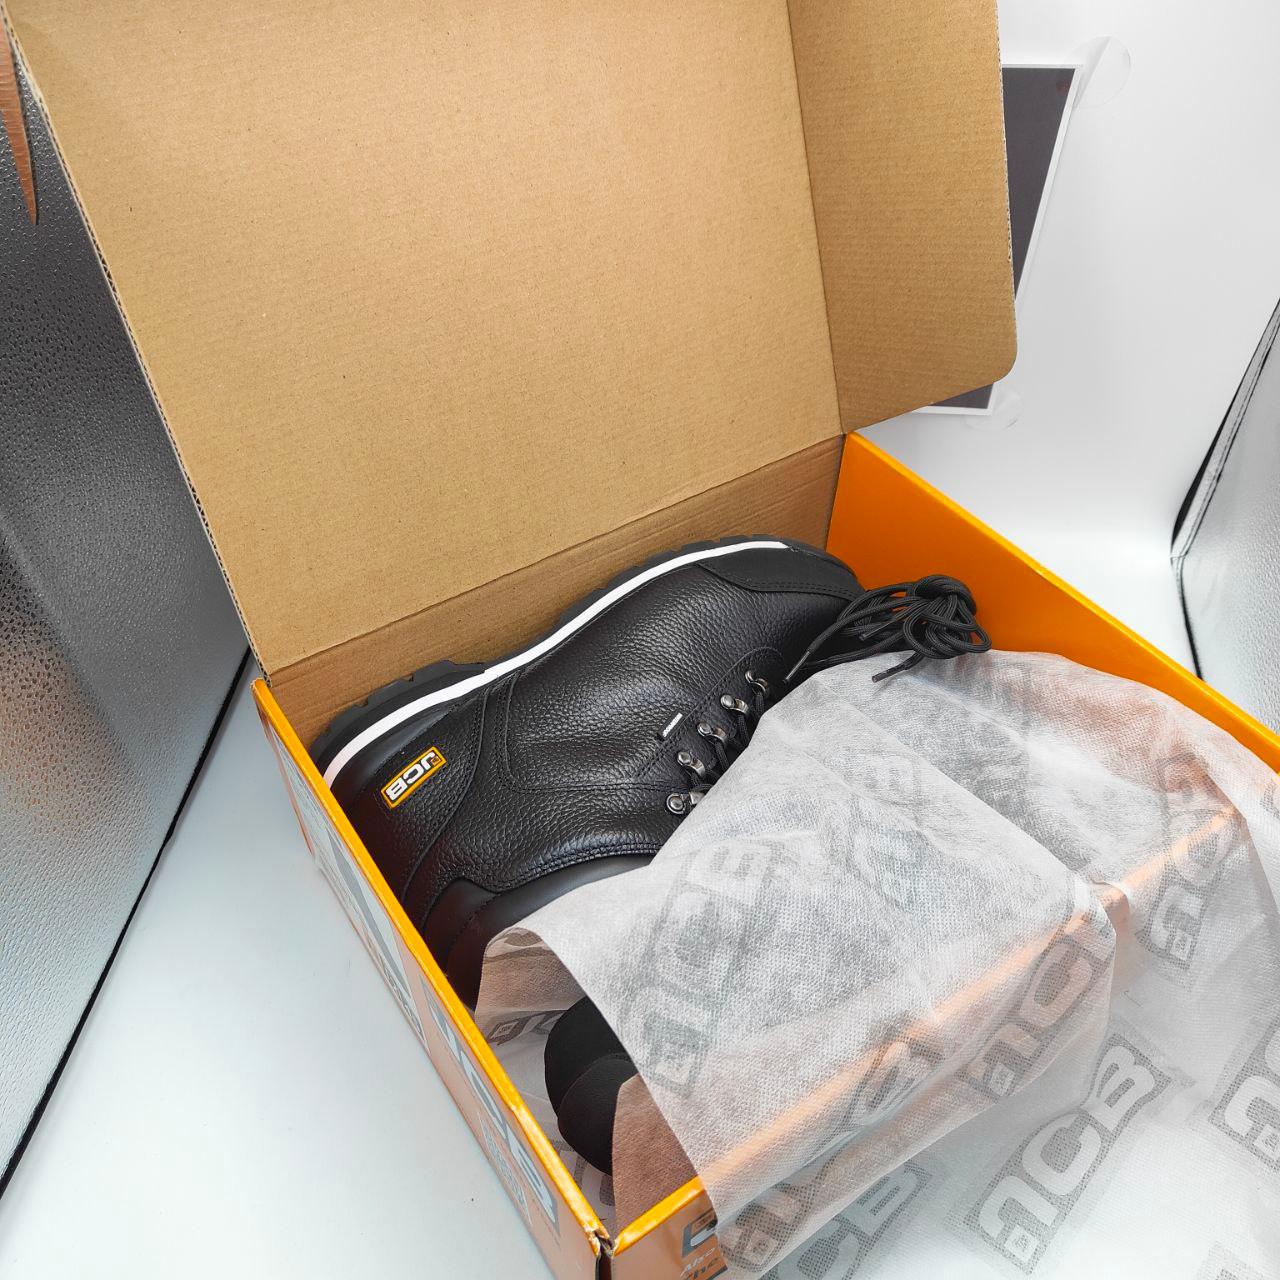 JCB - Safety Boots - Work Boots - Chukka Boots - Black - Size UK 11 - Massive Discounts